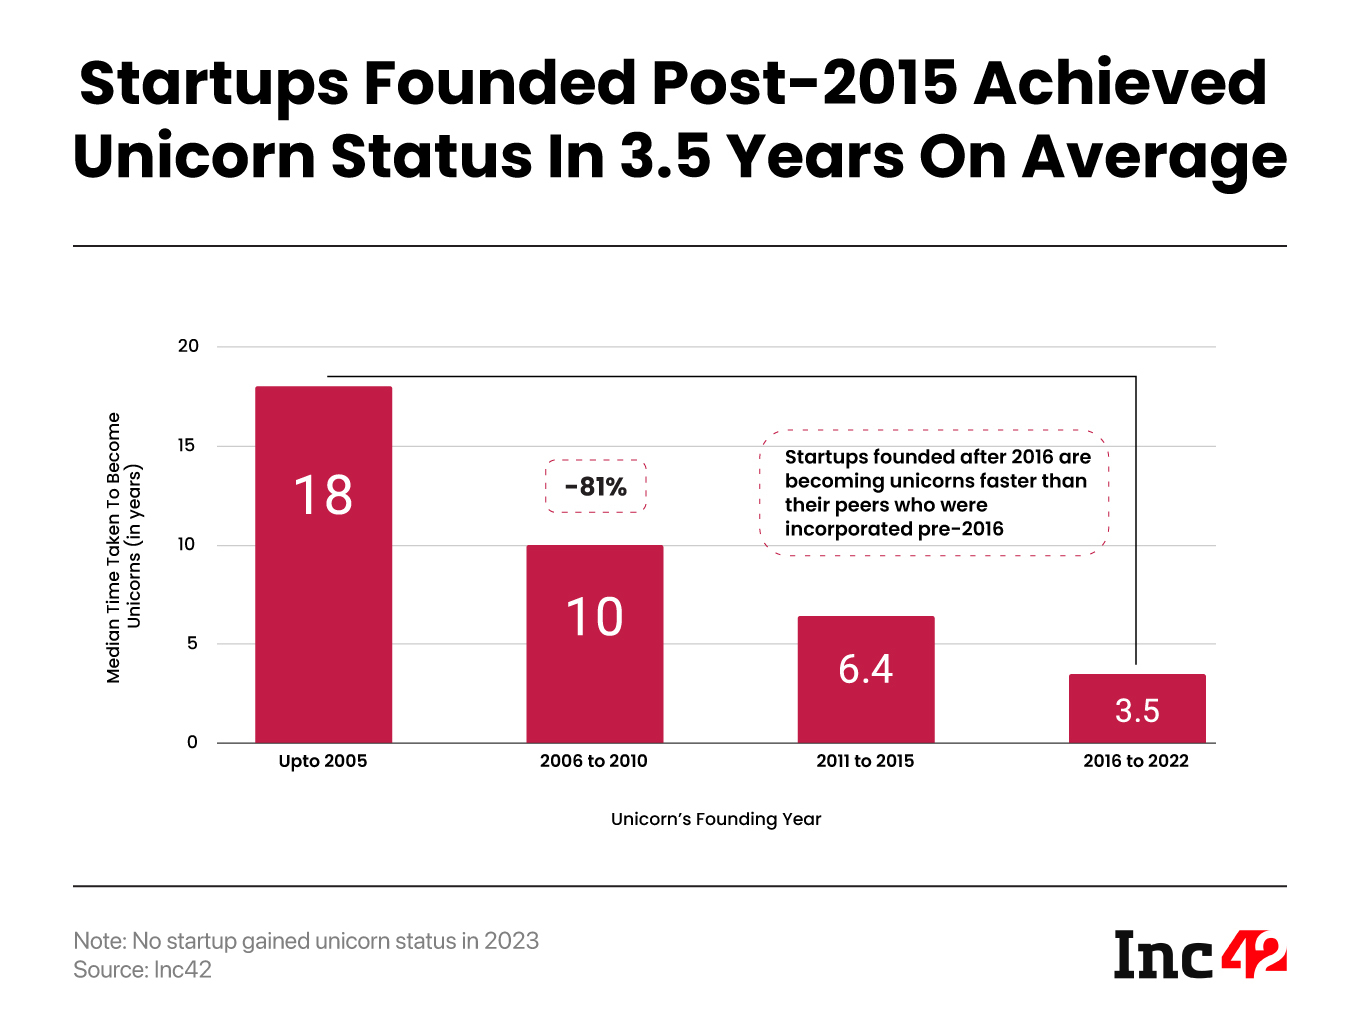 How Long Are Indian Startups Taking To Become Unicorns In A Post-Covid World?